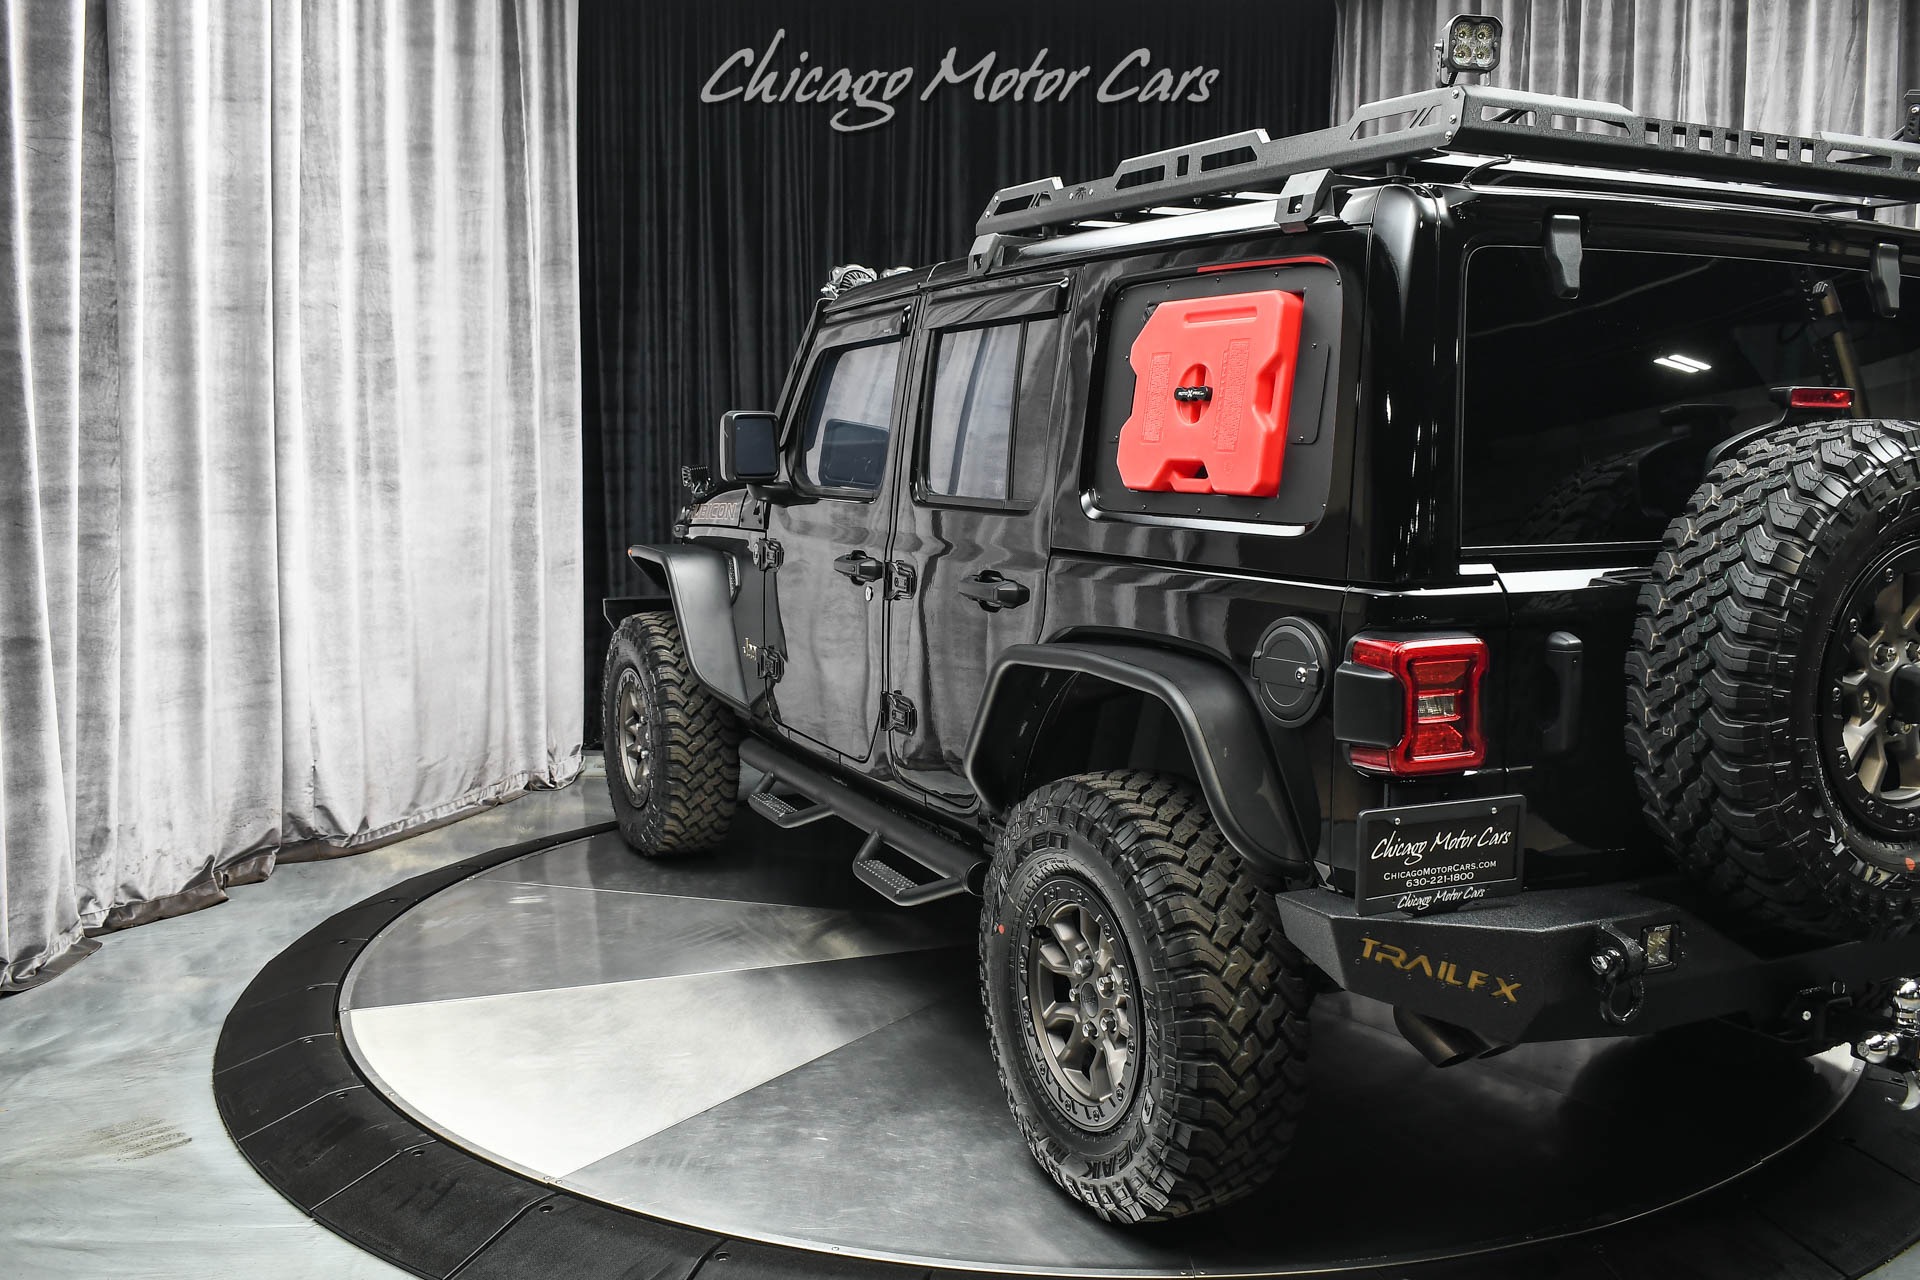 Used-2021-Jeep-Wrangler-Unlimited-Rubicon-392-4x4-BULLET-RESISTANT-Loaded-with-Upgrades-Armored